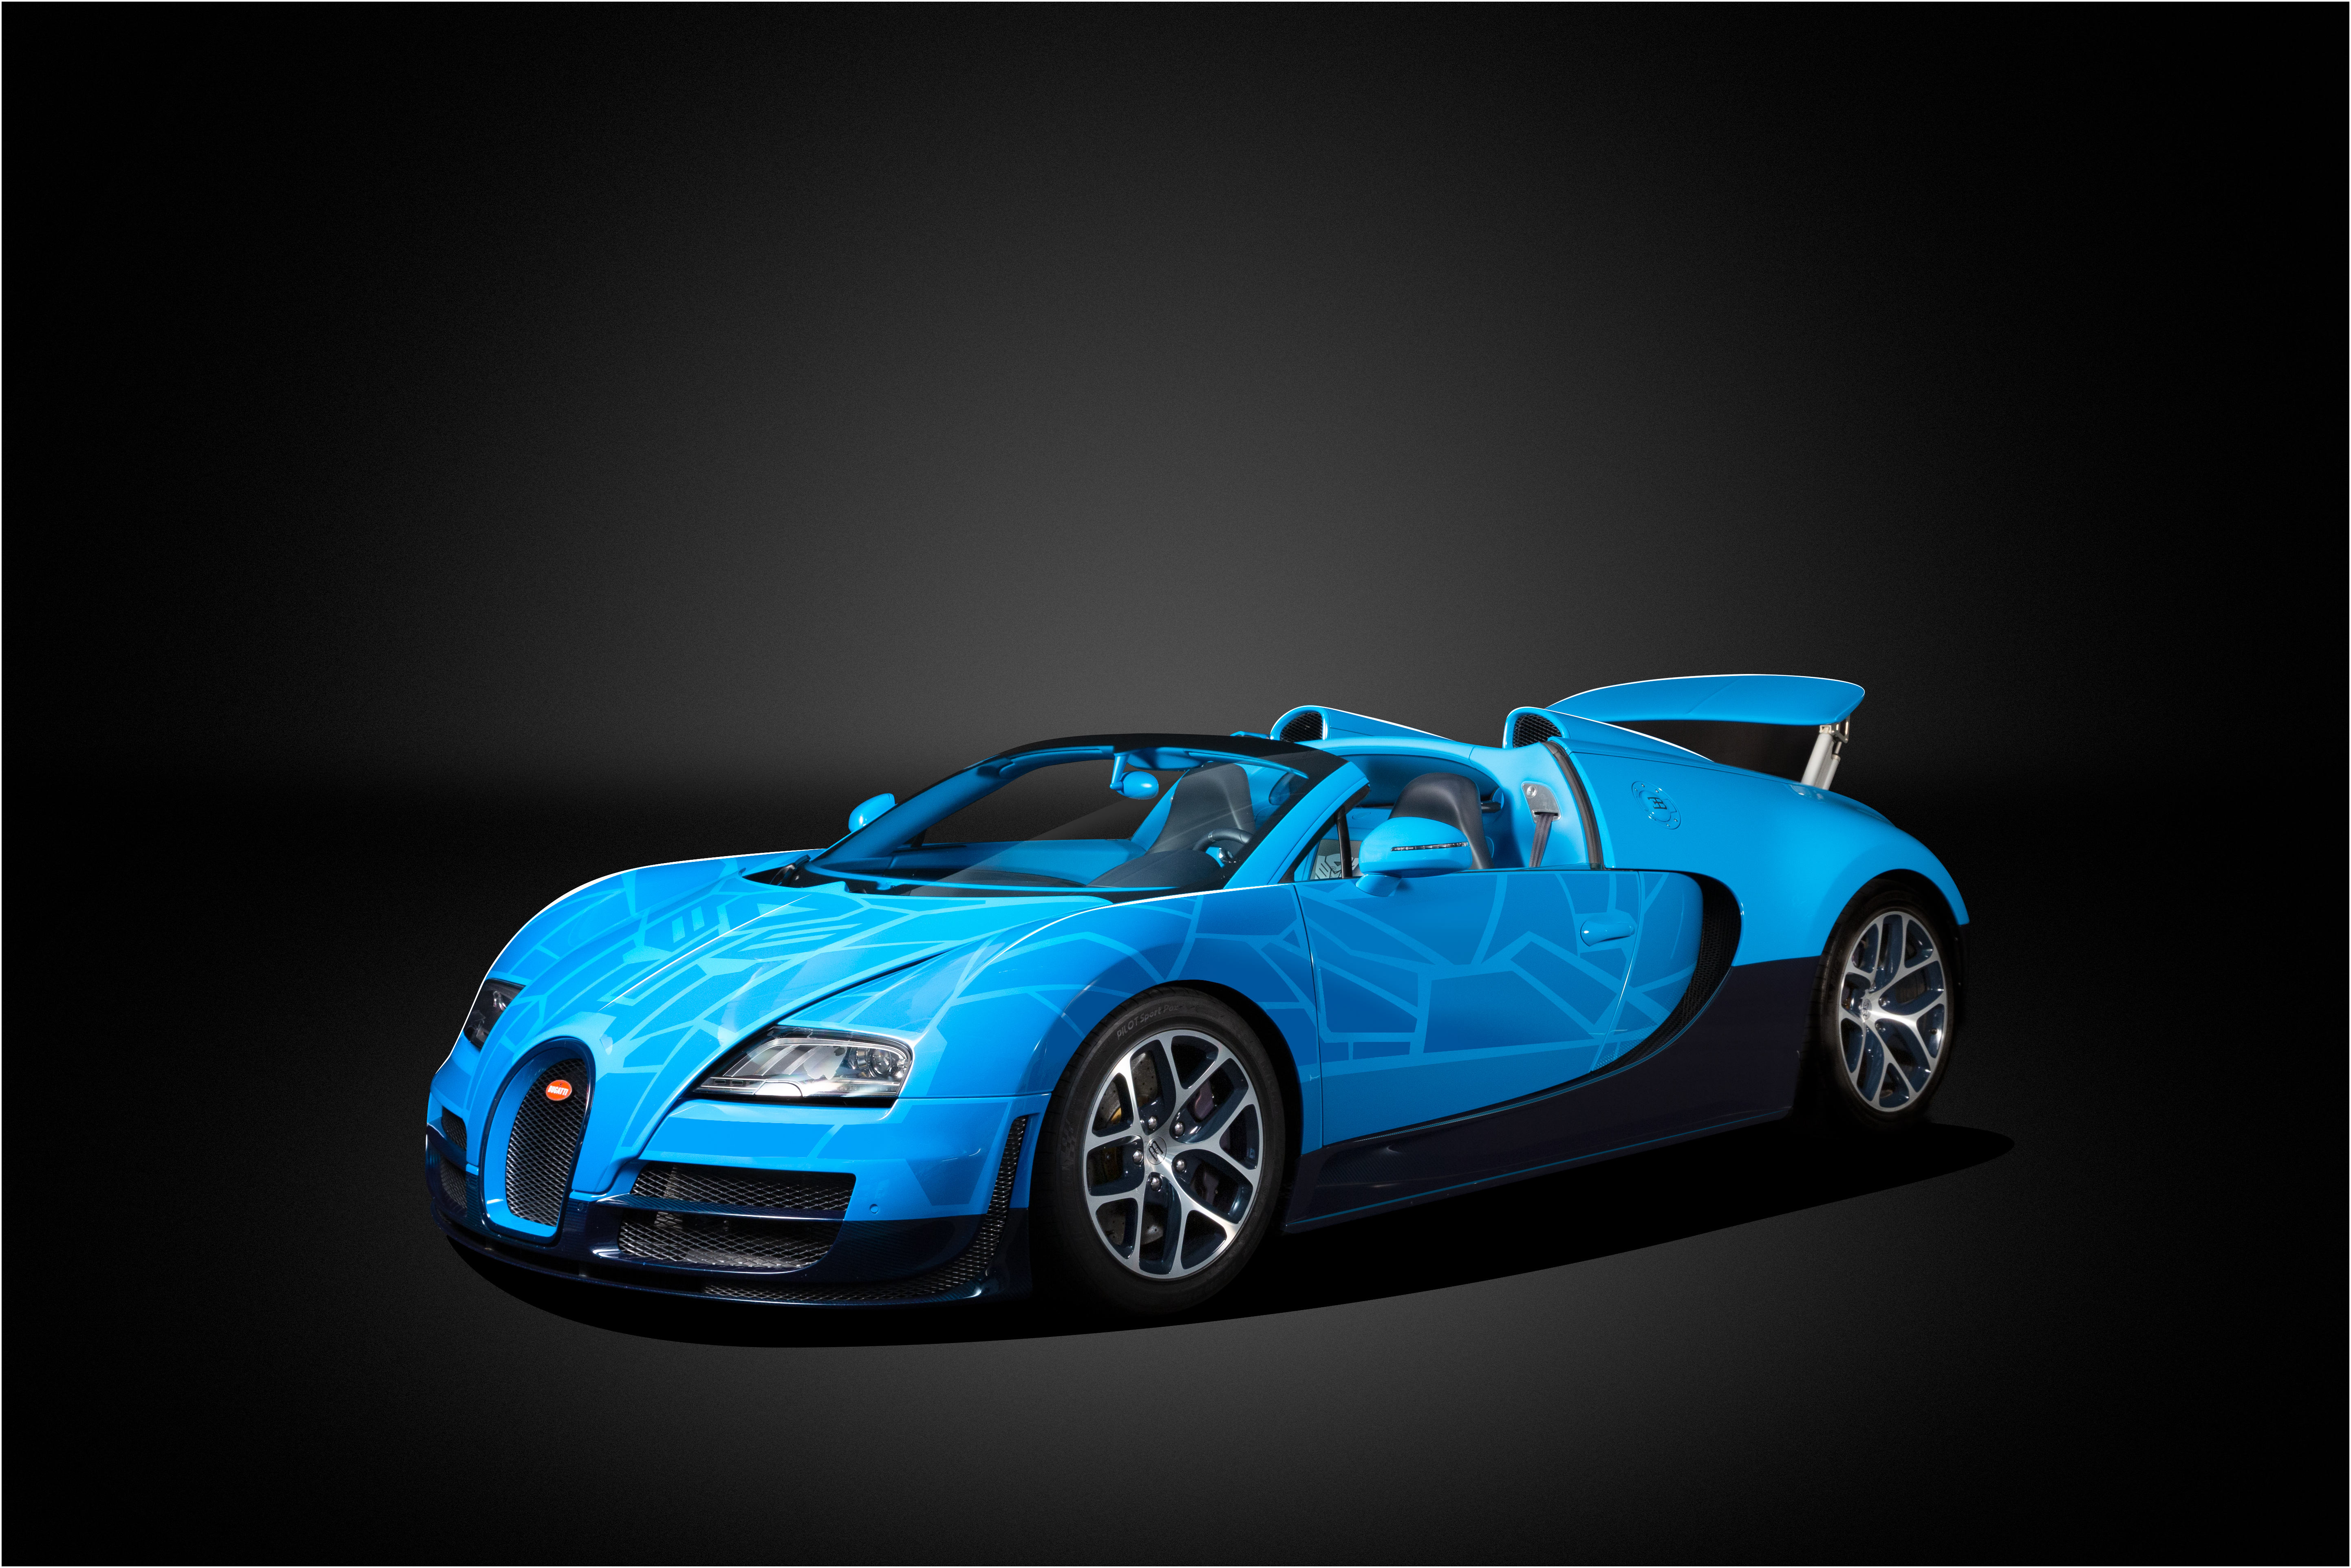 The ultra-rare Bugatti Veyron was specially commissioned by the owner